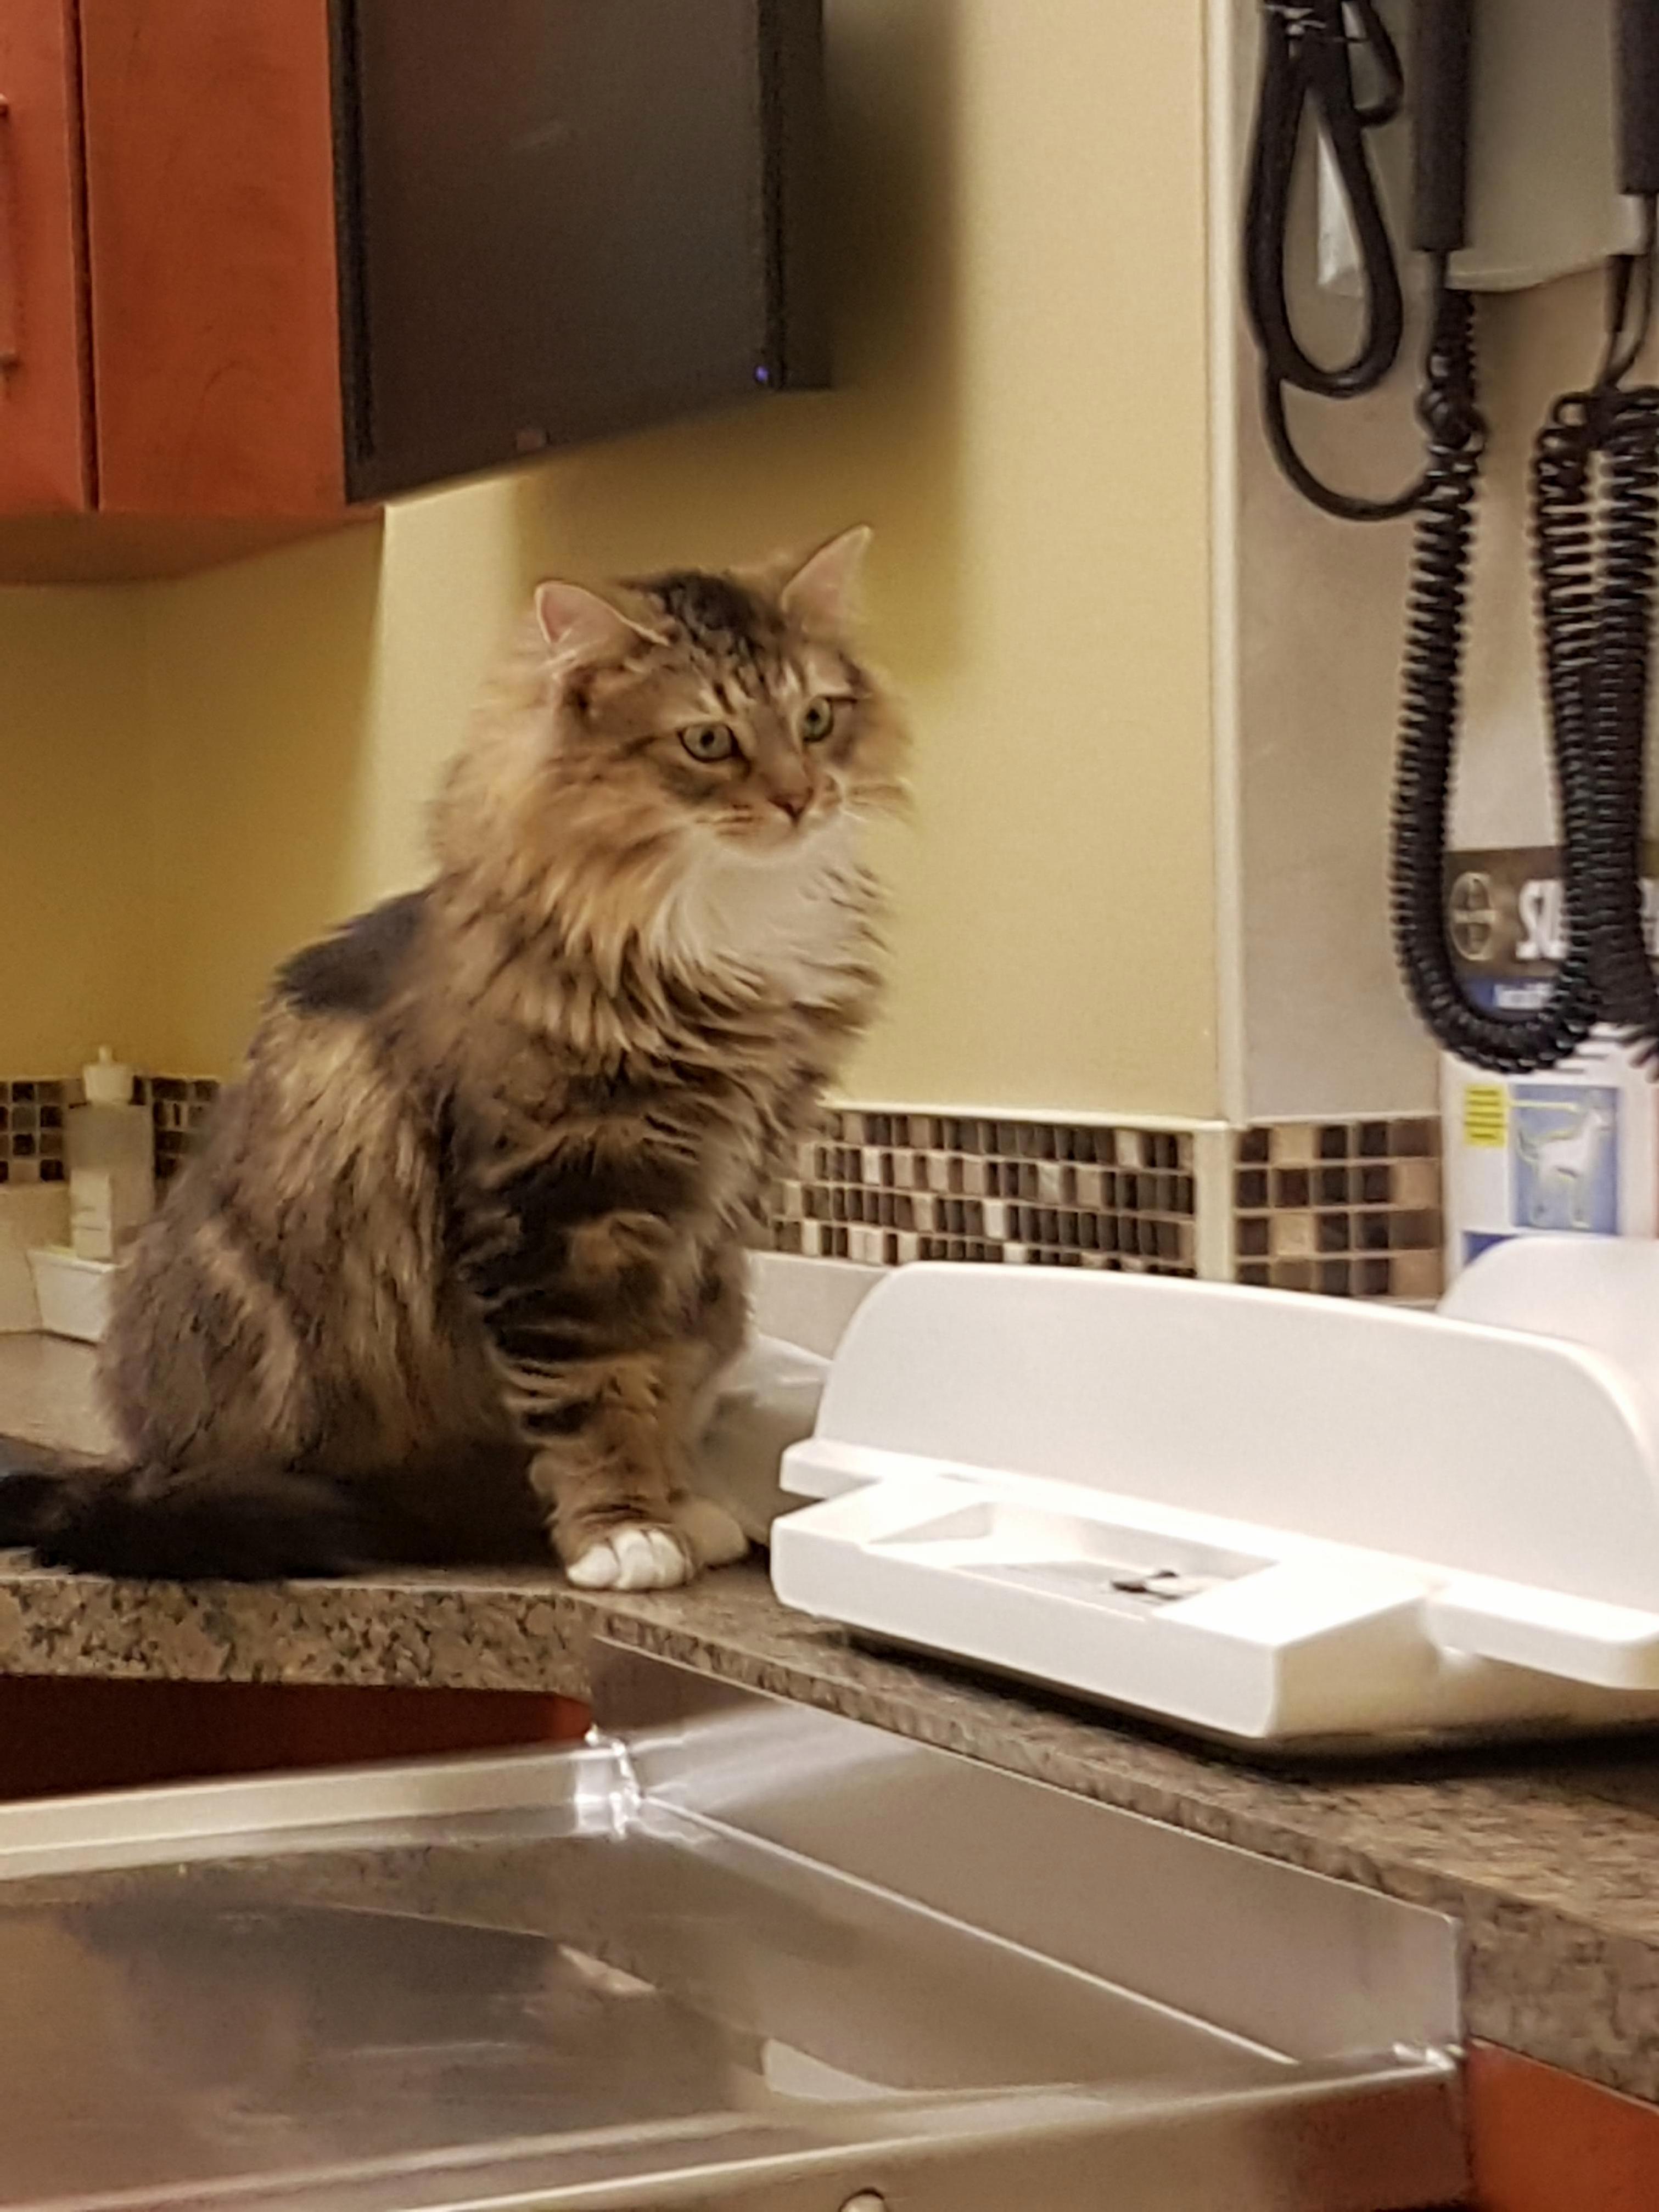 A new rescue, maine coon looking